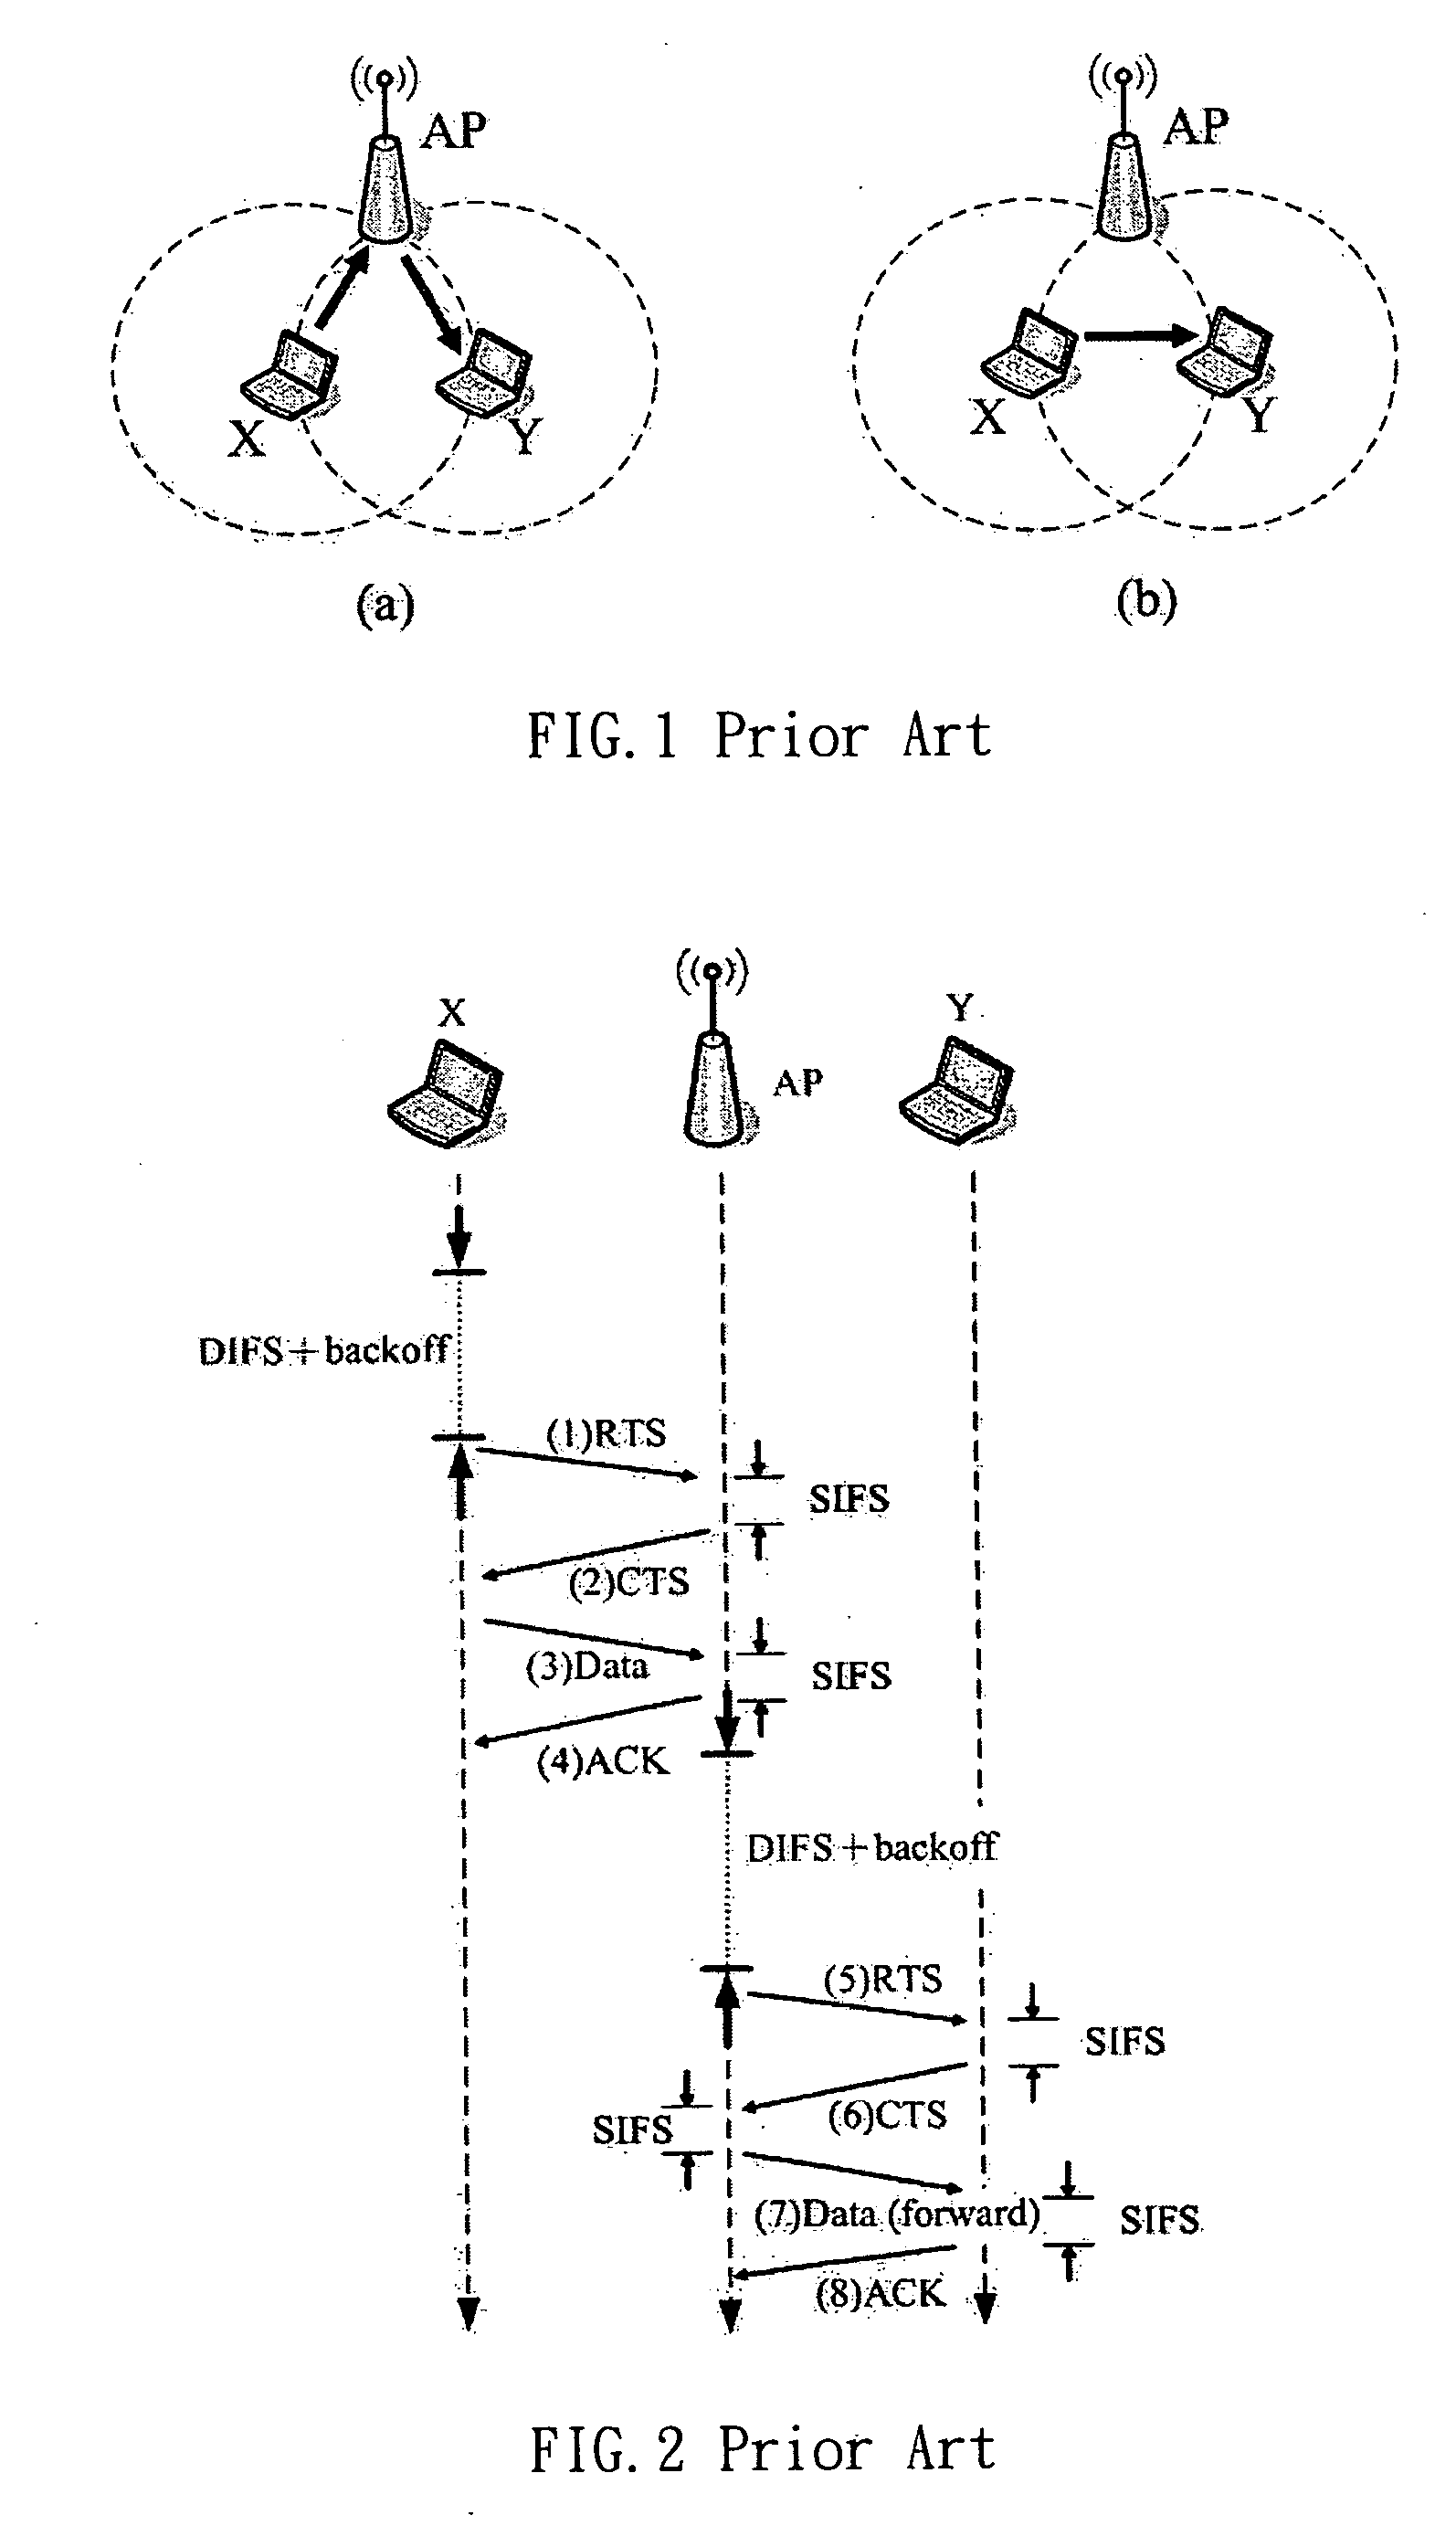 Enhanced direct link transmission method and system for wireless local area networks